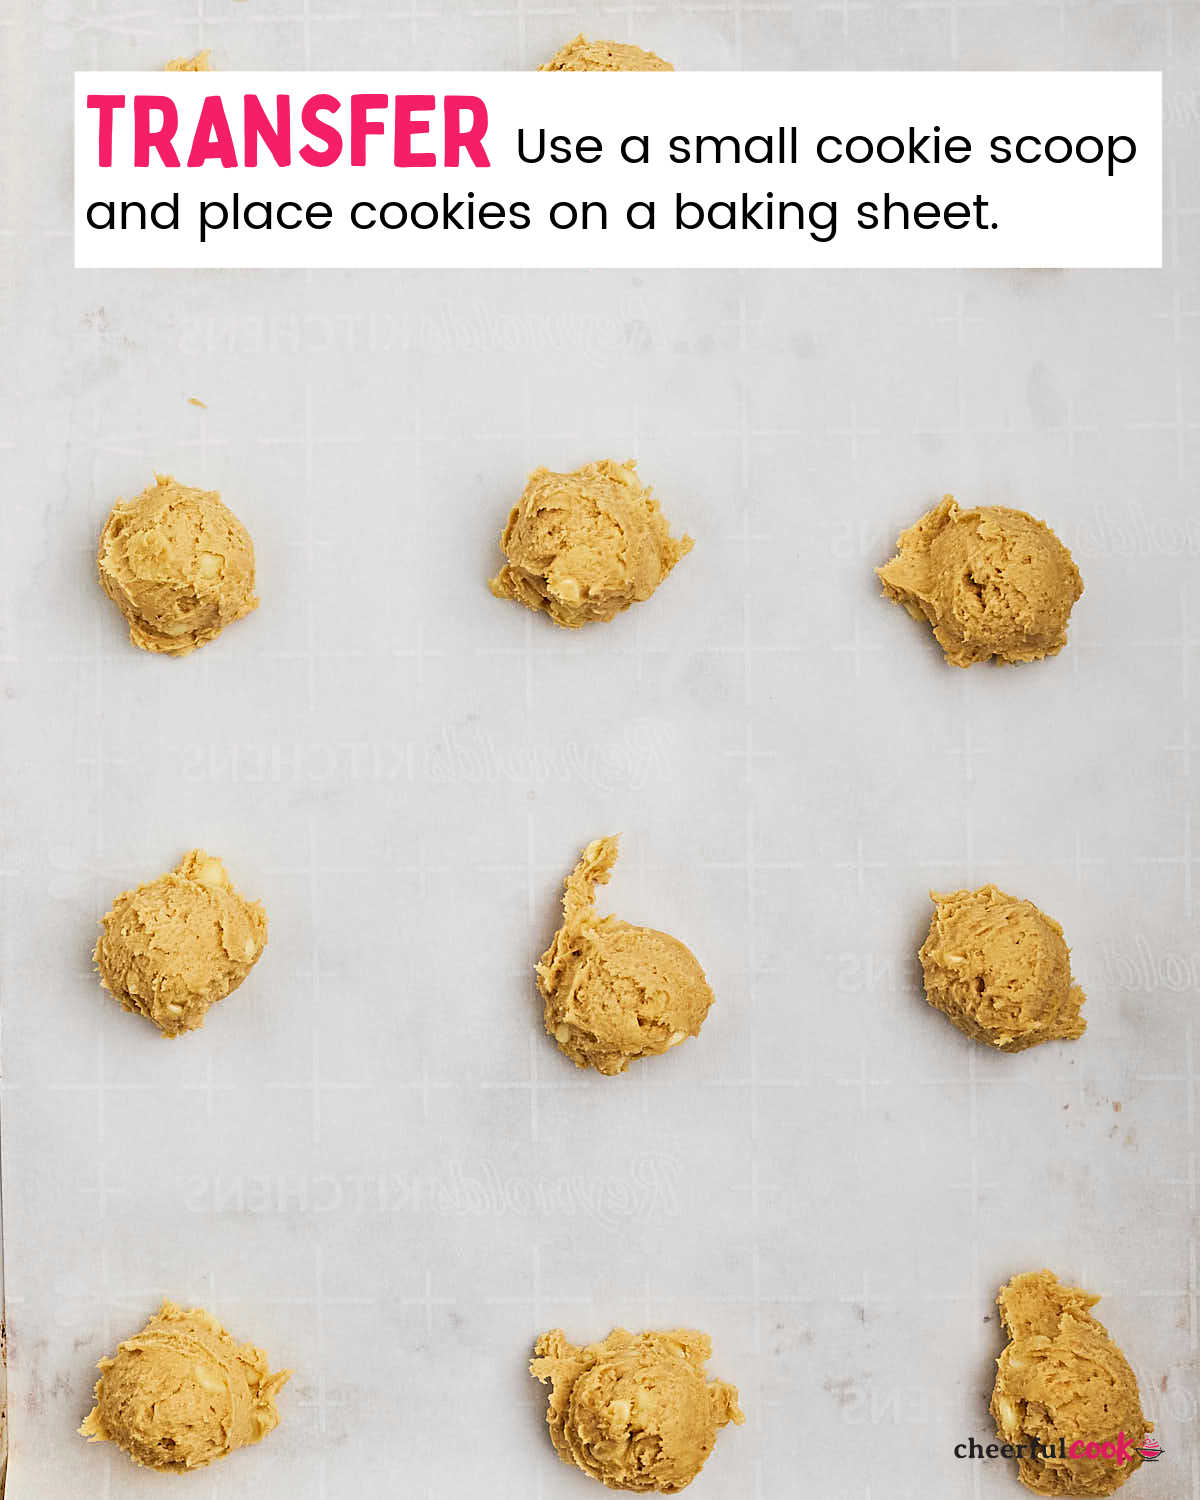 Process Step: Use cookie scoop, place on baking sheet.